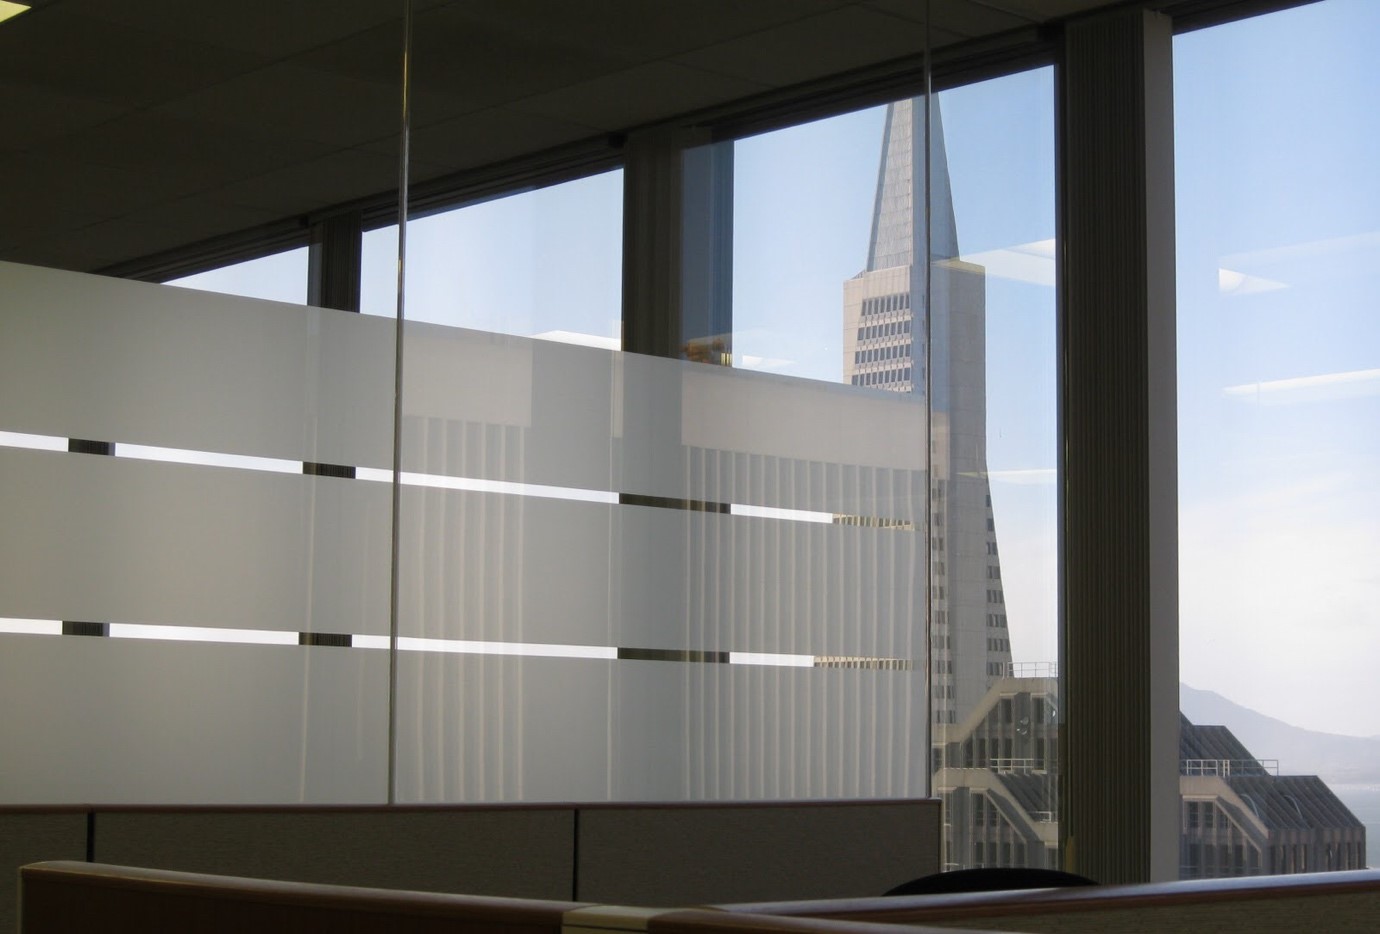 Frosted Window Films - Solution For Your Privacy & Security Concerns